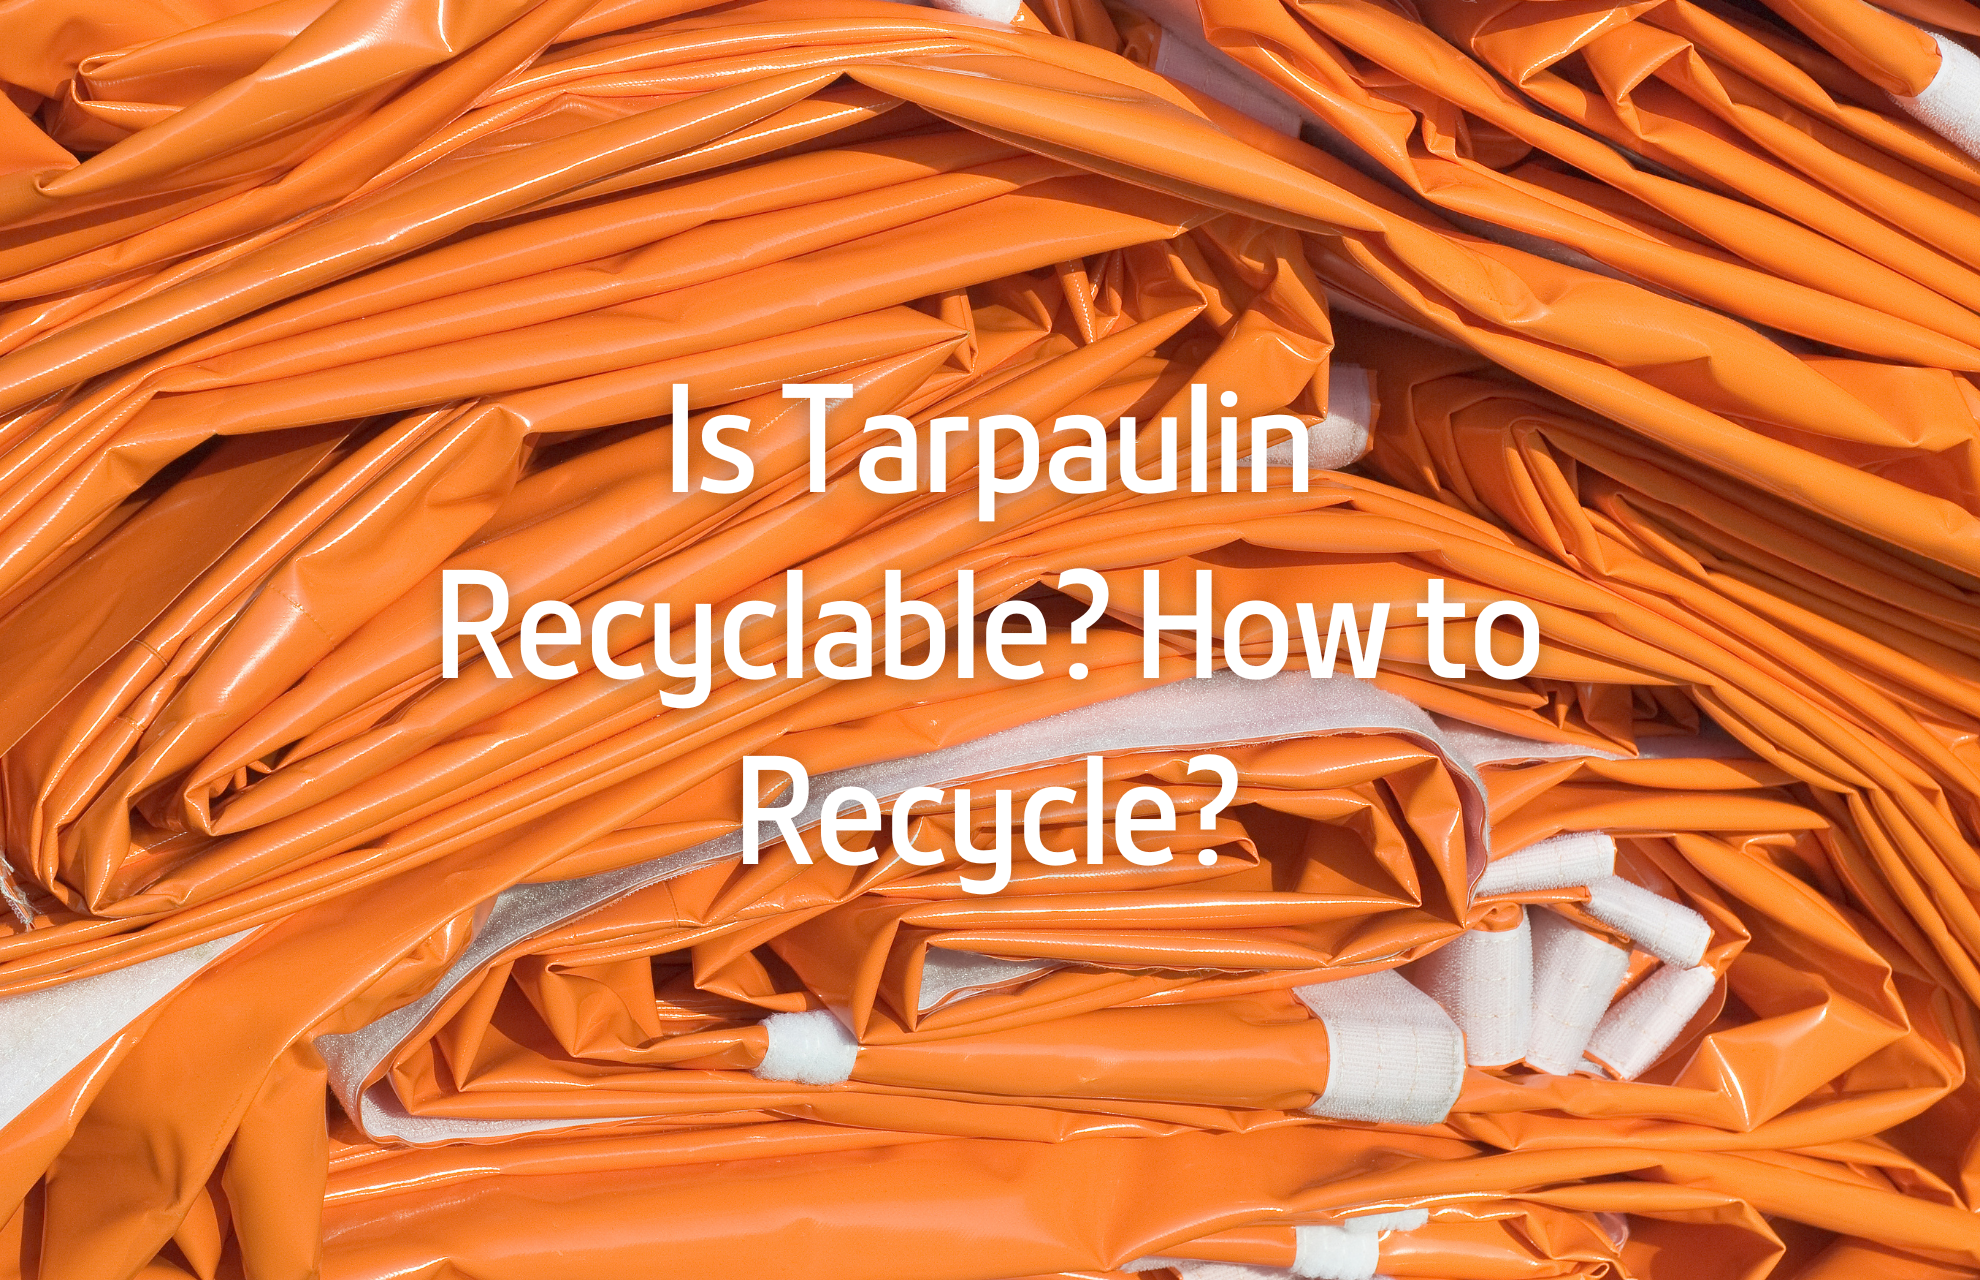 Is Tarpaulin Recyclable? How to Recycle?